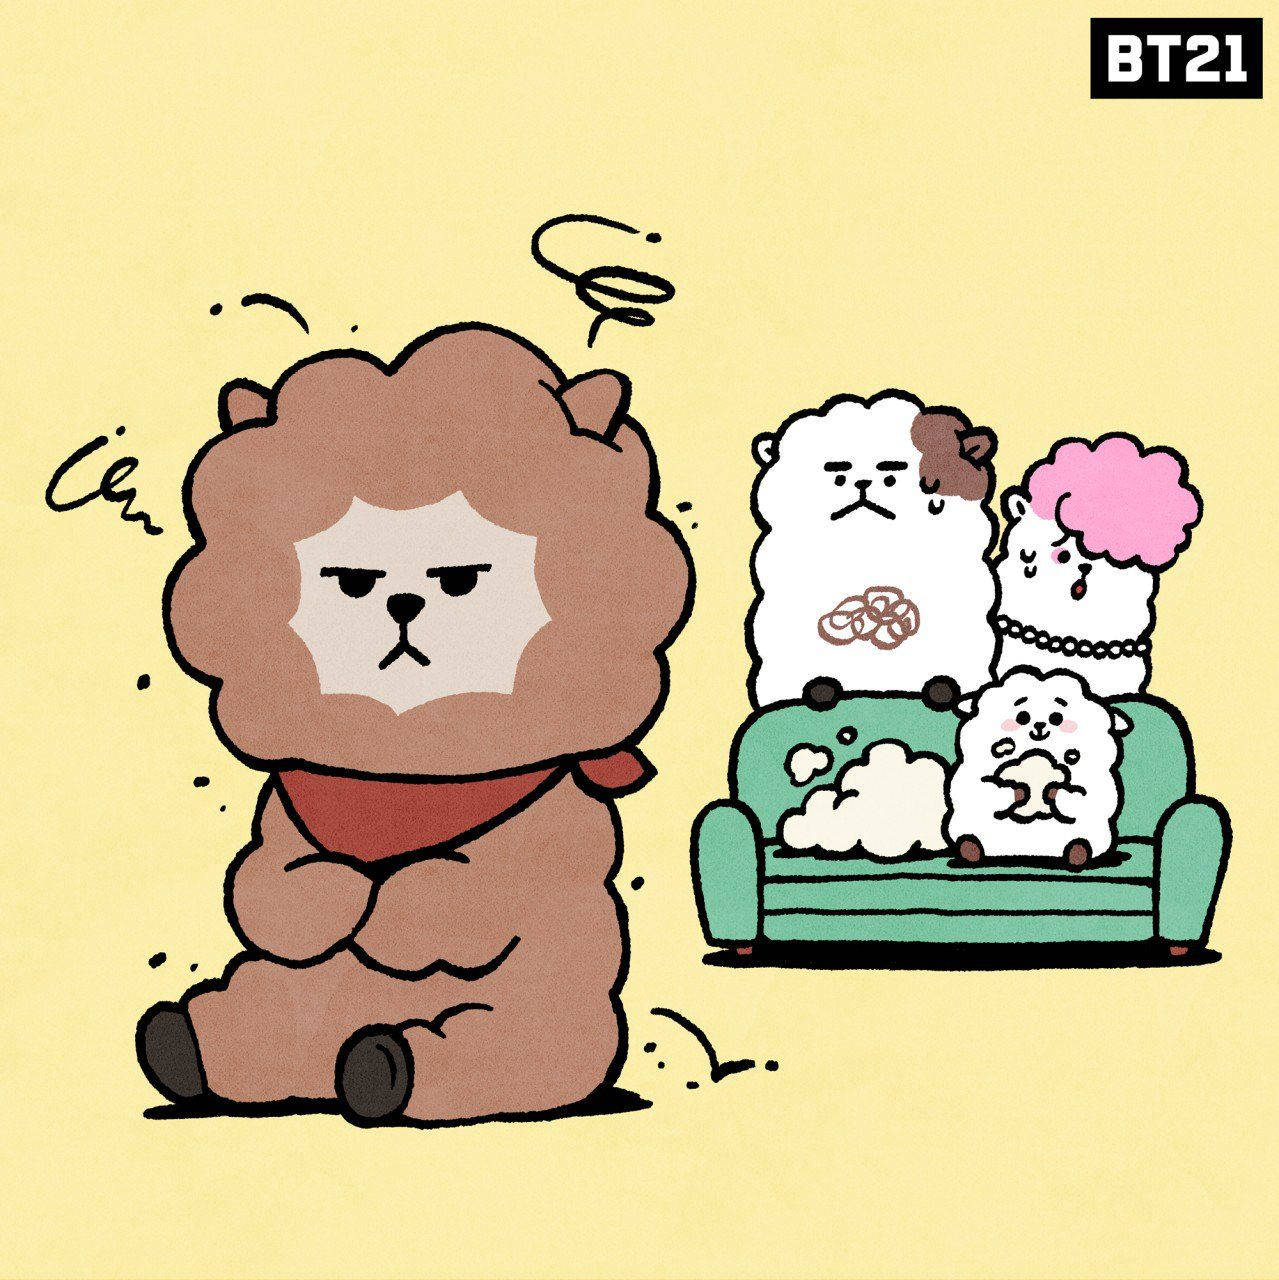 Brown Rj Bt21 With His Family